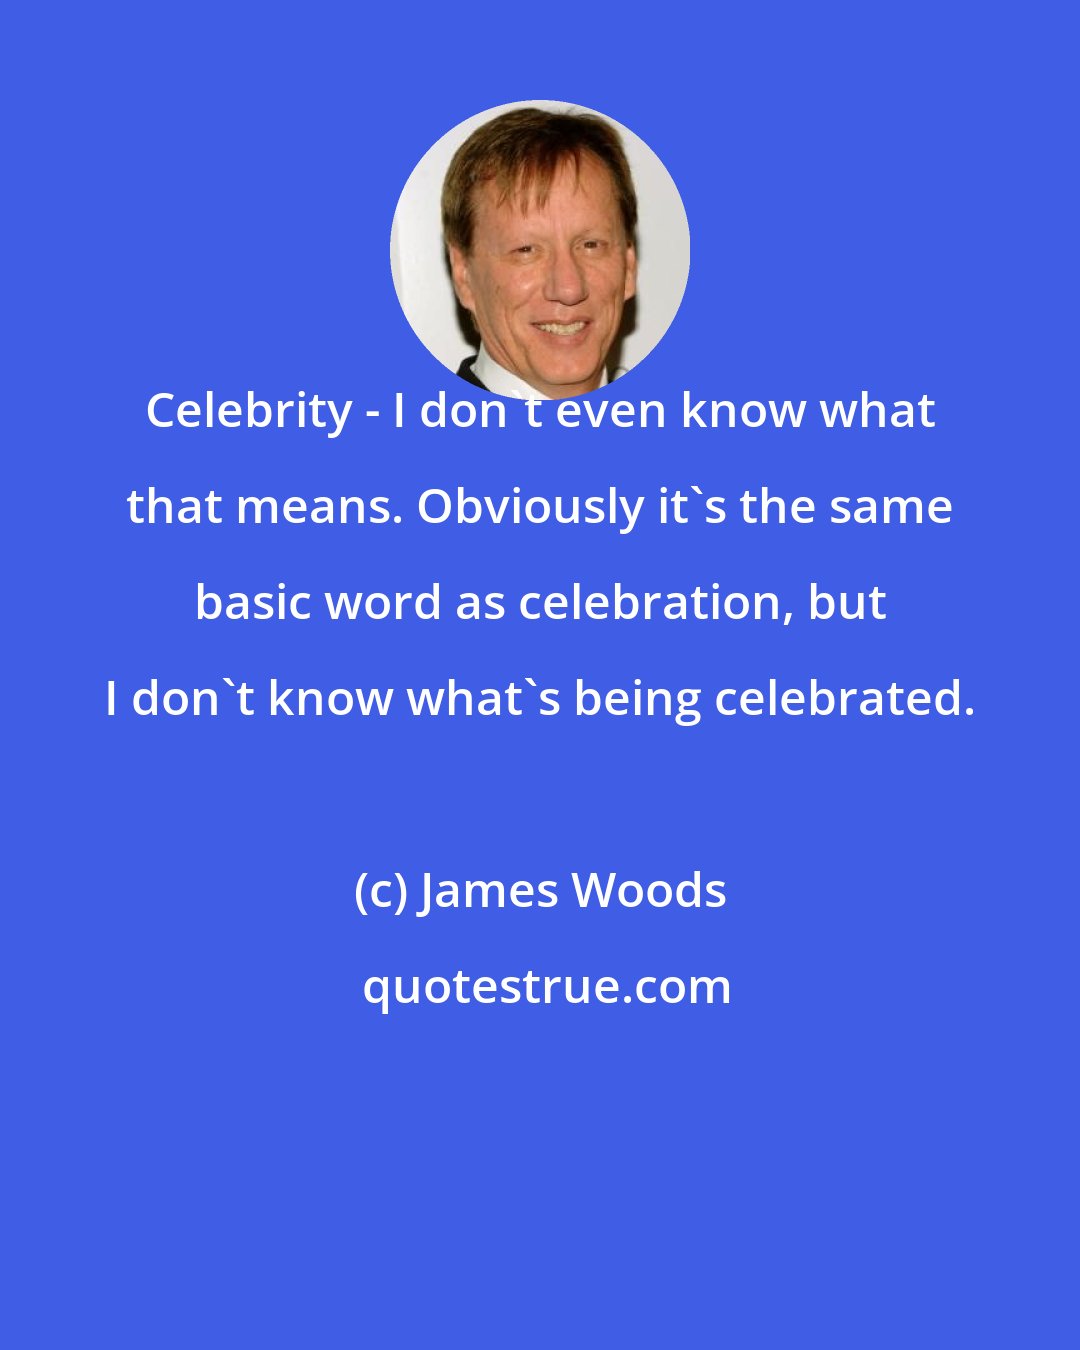 James Woods: Celebrity - I don't even know what that means. Obviously it's the same basic word as celebration, but I don't know what's being celebrated.